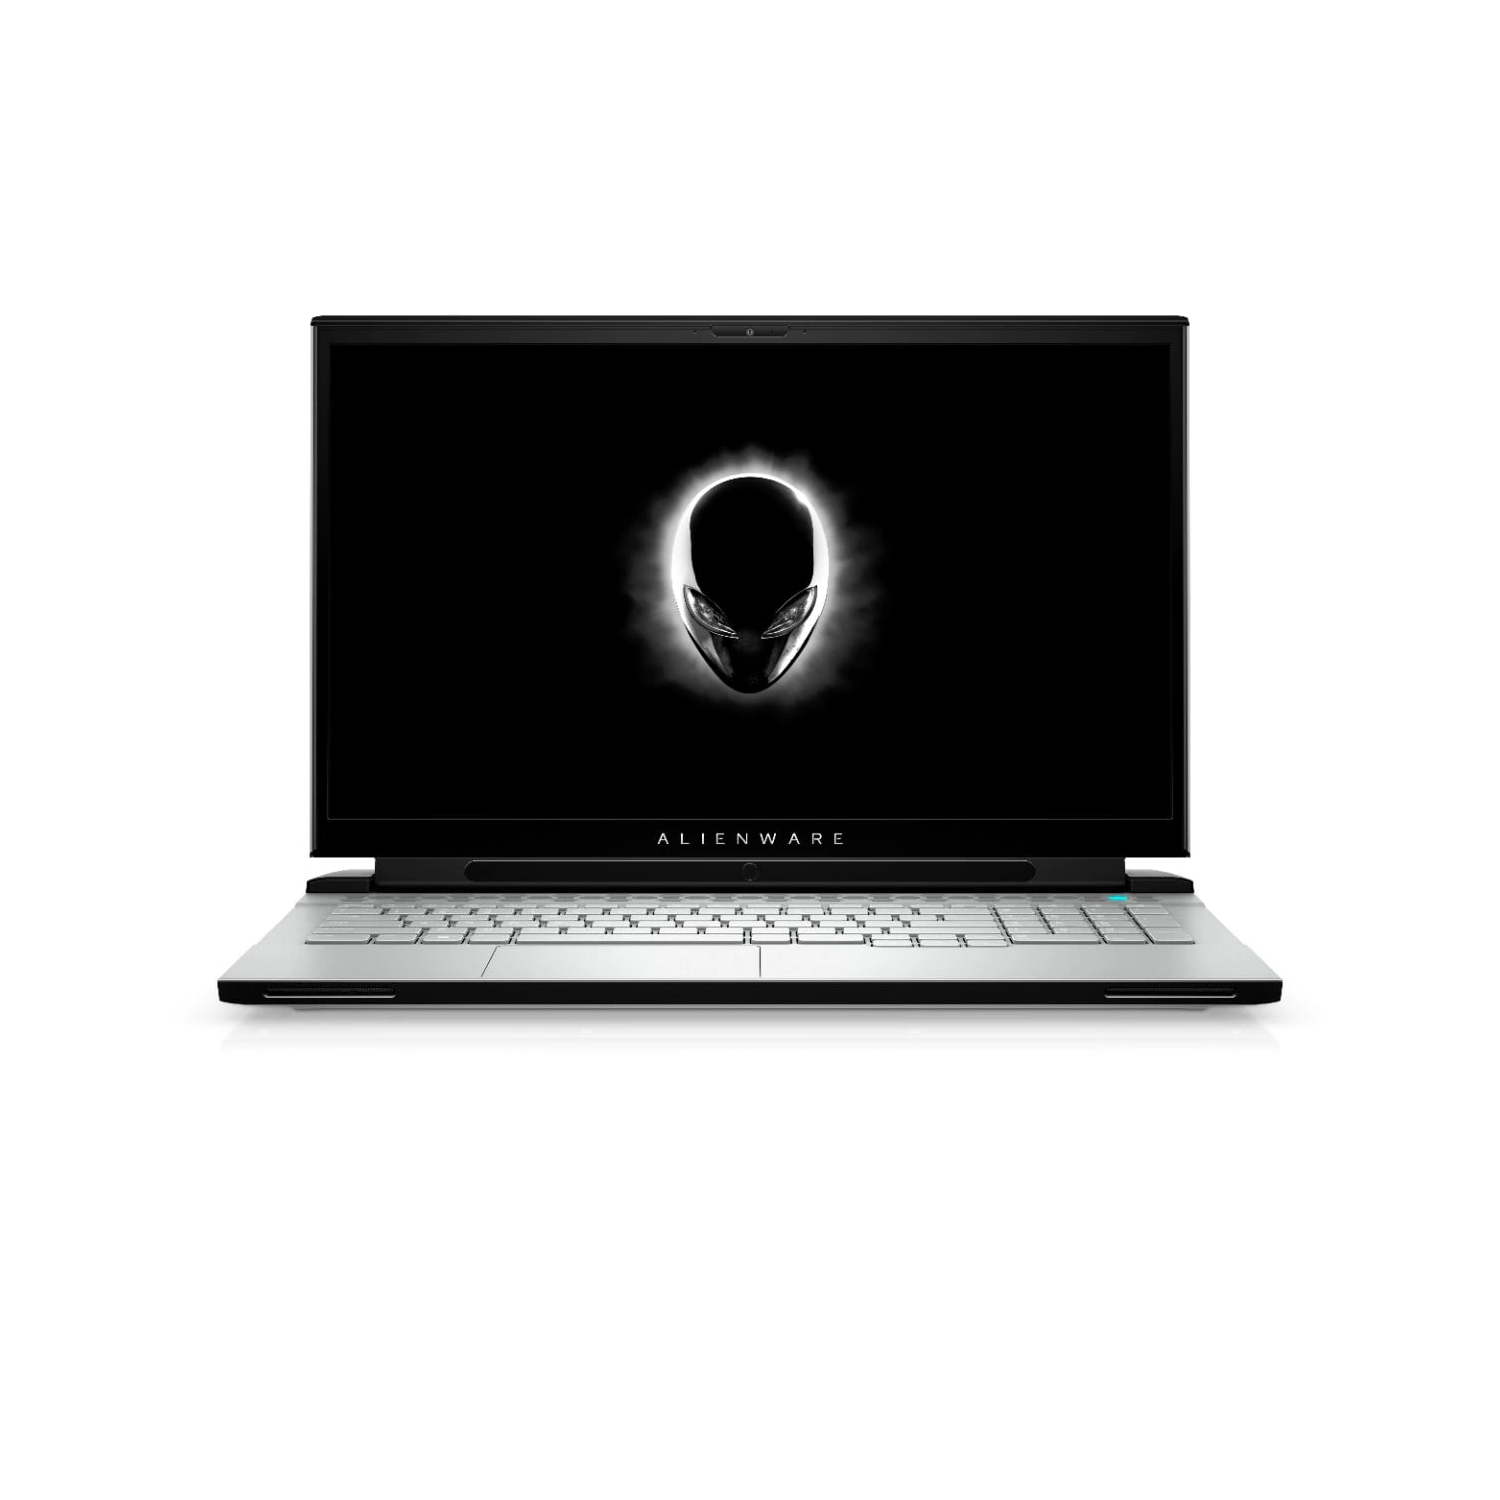 Refurbished (Excellent) - Dell Alienware m17 R3 Gaming Laptop (2020), 17.3" FHD, Core i7, 1TB SSD, 16GB RAM, RTX 2070, 6 Cores @ 5 GHz, 10th Gen CPU Certified Refurbished